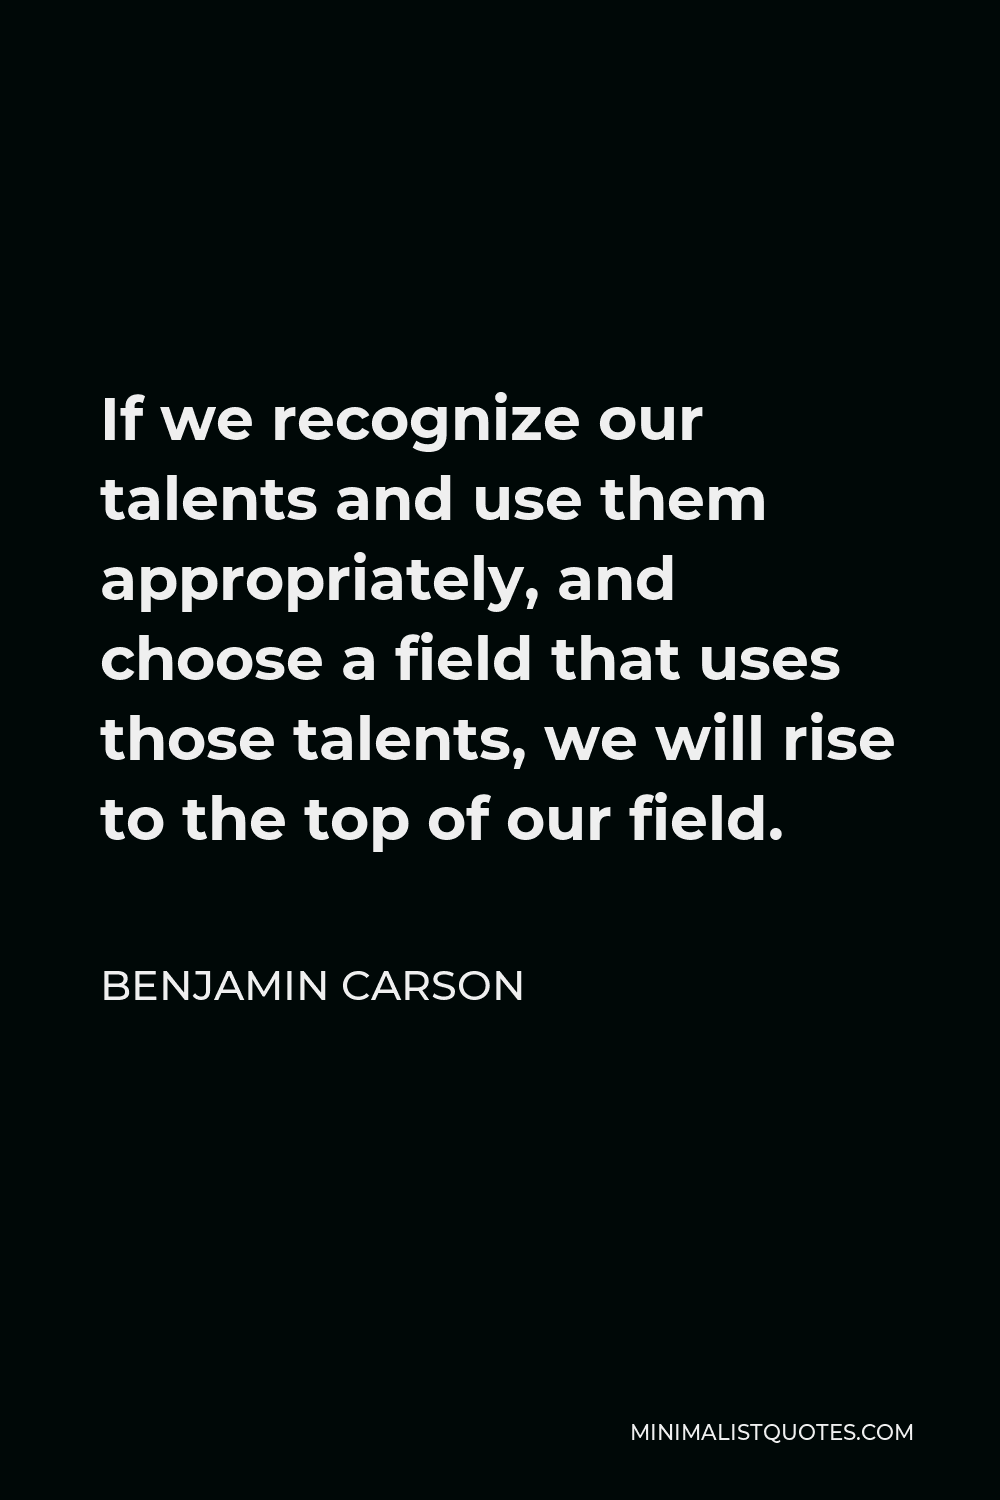 Benjamin Carson Quote - If we recognize our talents and use them appropriately, and choose a field that uses those talents, we will rise to the top of our field.